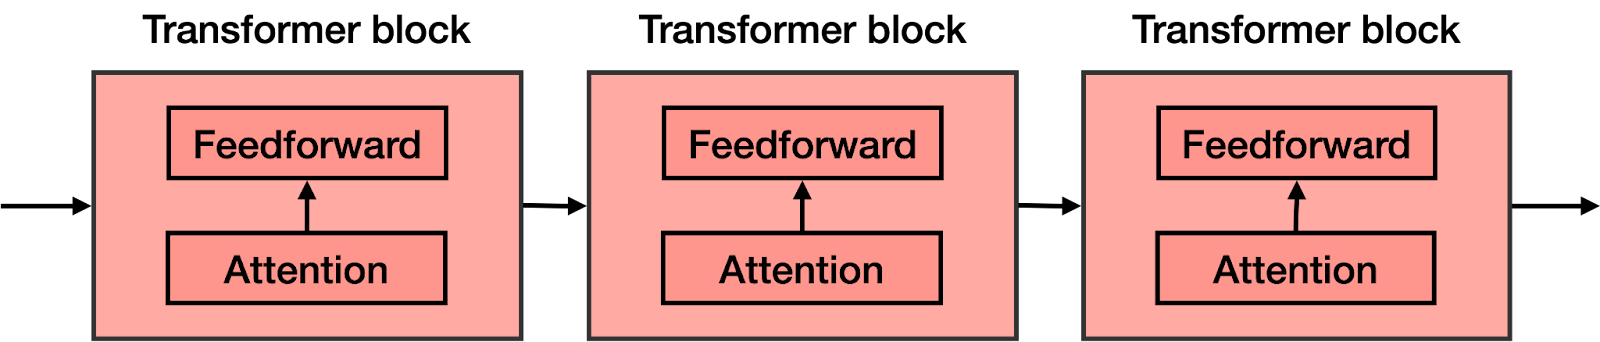 The transformer is a concatenation of many transformer blocks. Each one of these is composed by an attention component followed by a feedforward component (a neural network).